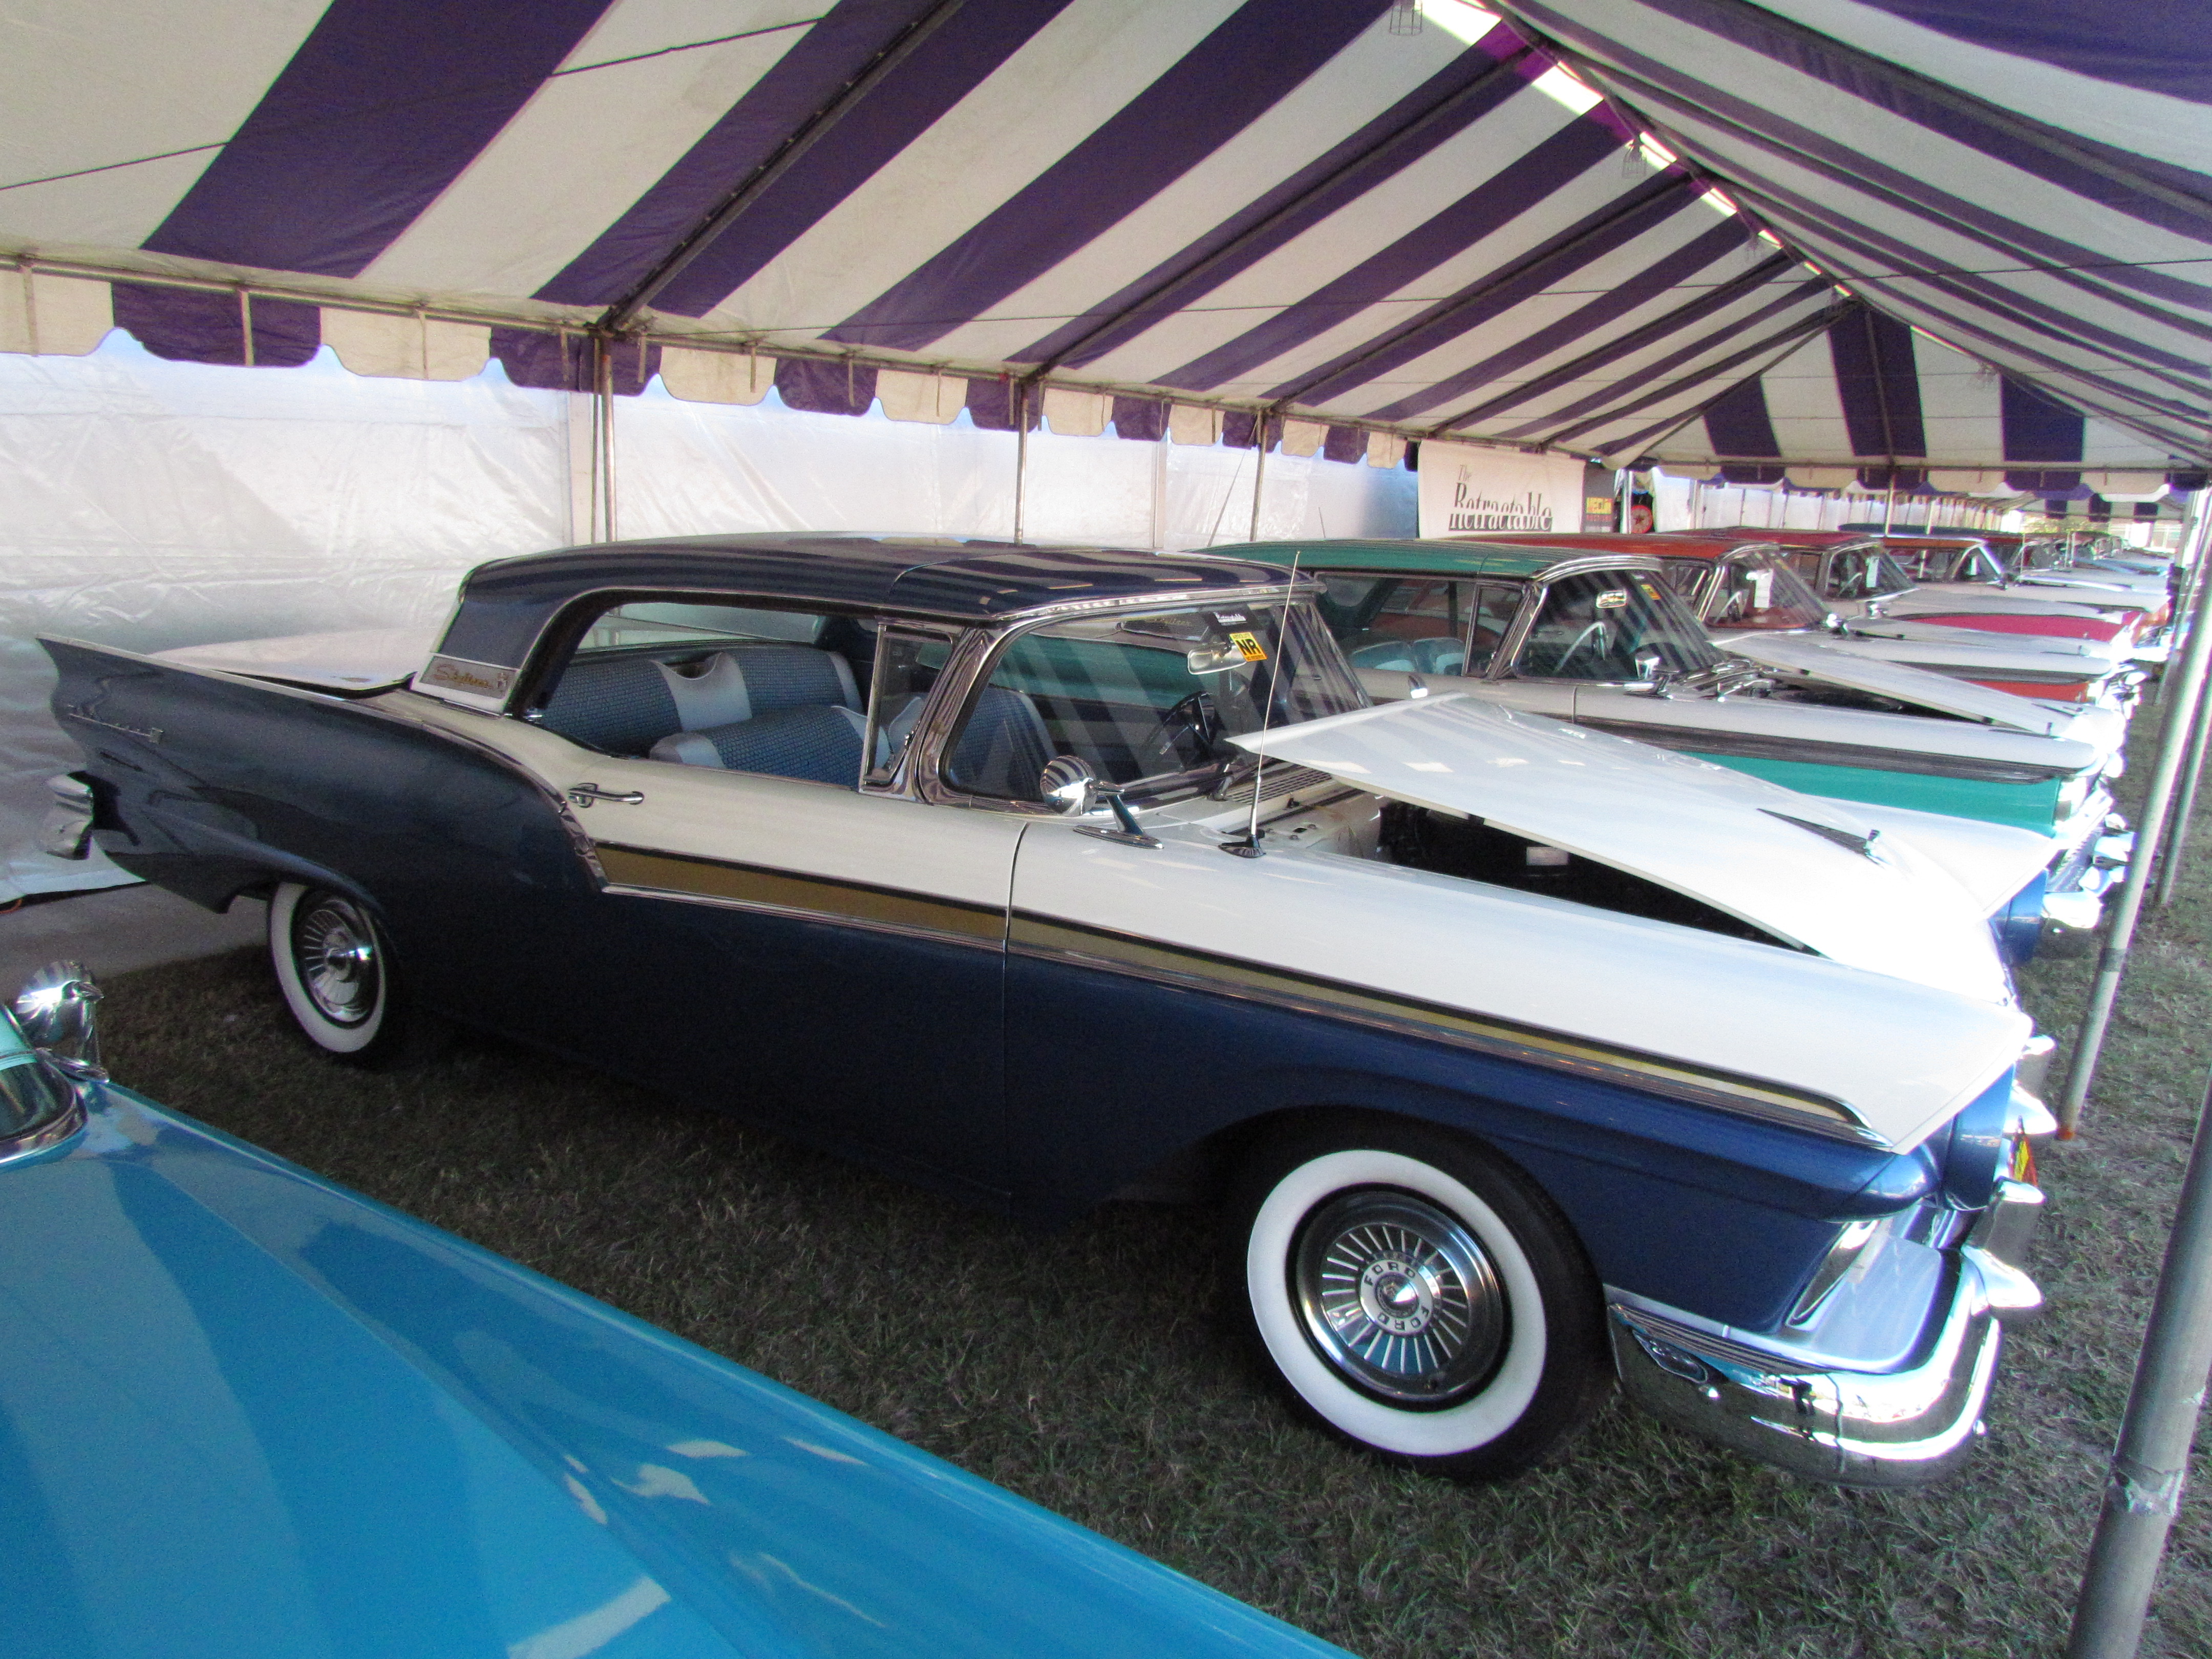 , Larry’s likes at Mecum’s Kissimmee auction, ClassicCars.com Journal